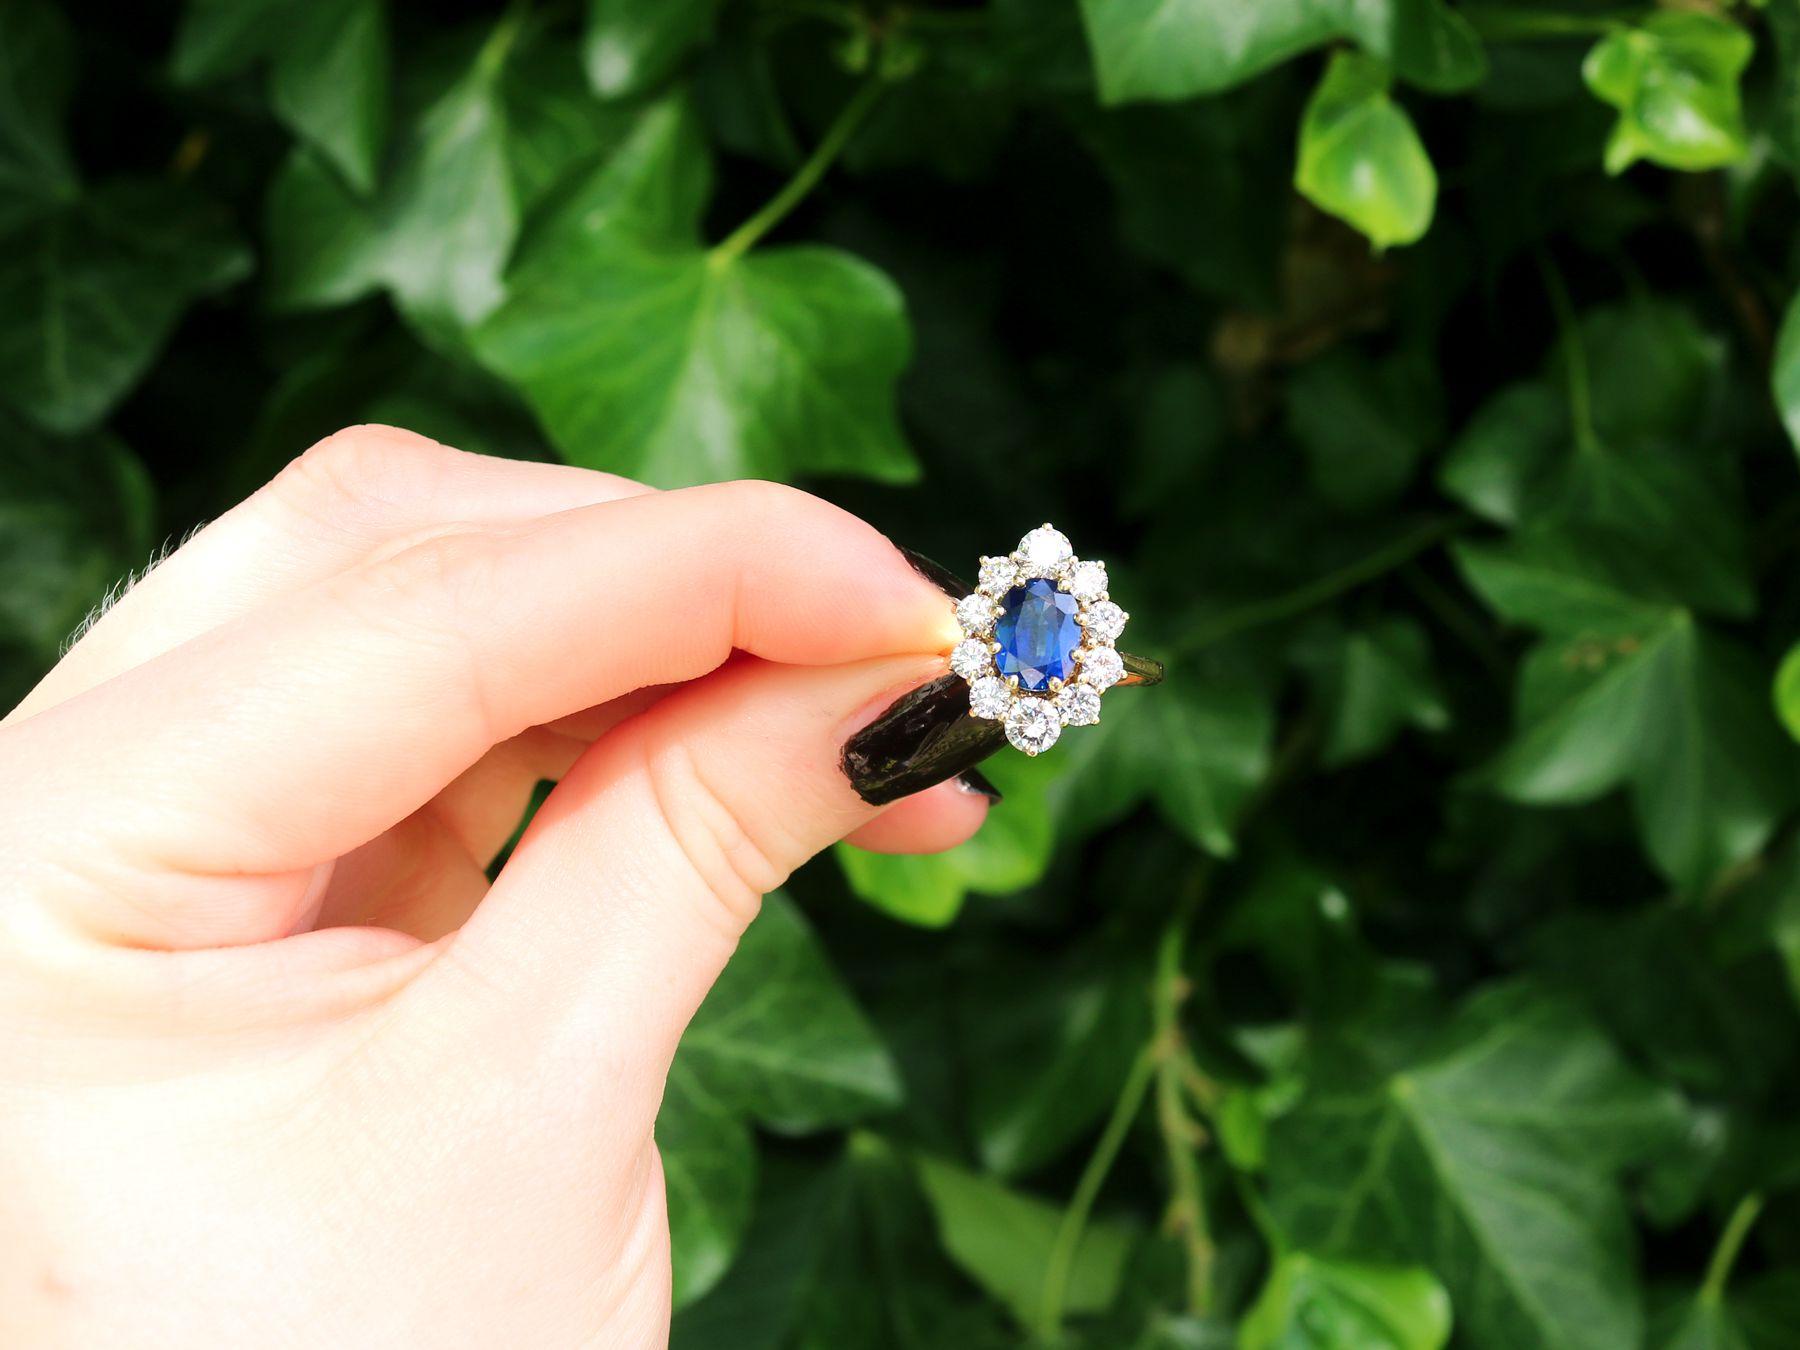 A stunning, fine and impressive vintage 2.90 carat sapphire and 1.62 carat diamond, 18 karat yellow gold cluster ring; part of our diverse gemstone jewelry and estate jewelry collections.

This stunning vintage sapphire and diamond ring has been